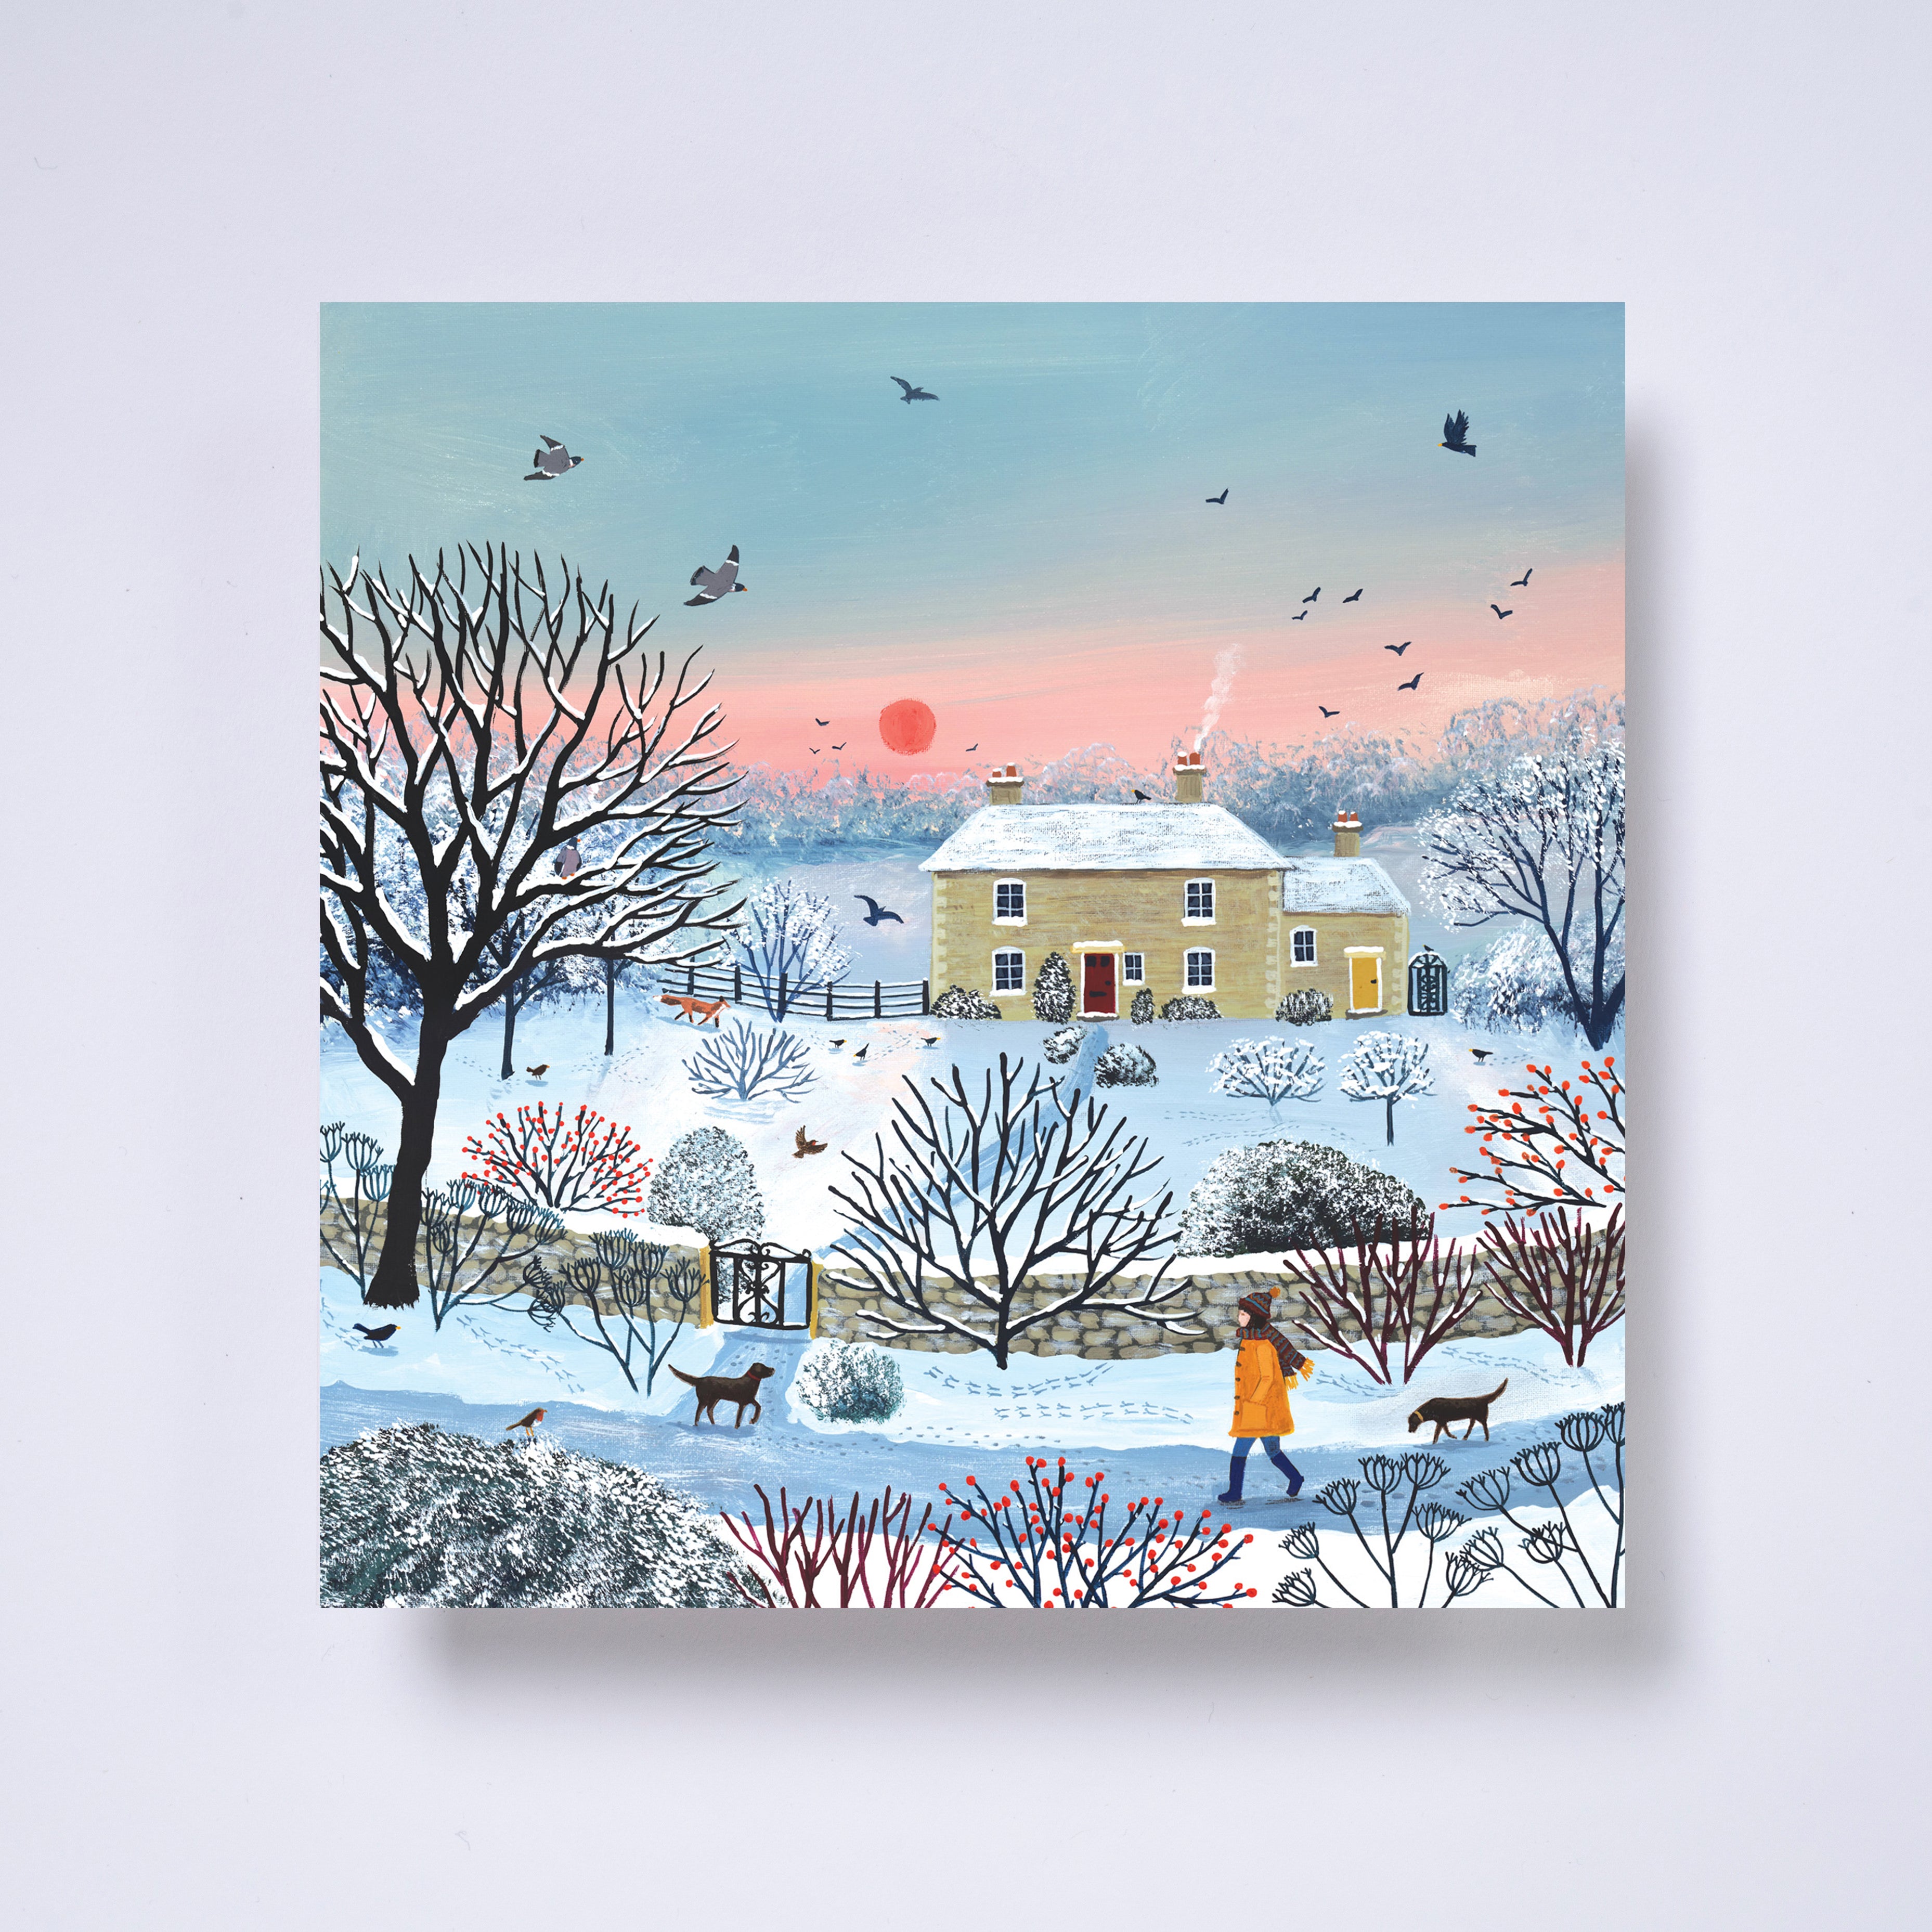 Midwinter walk - Welsh/English bilingual - pack of 10 charity Christmas cards with envelopes